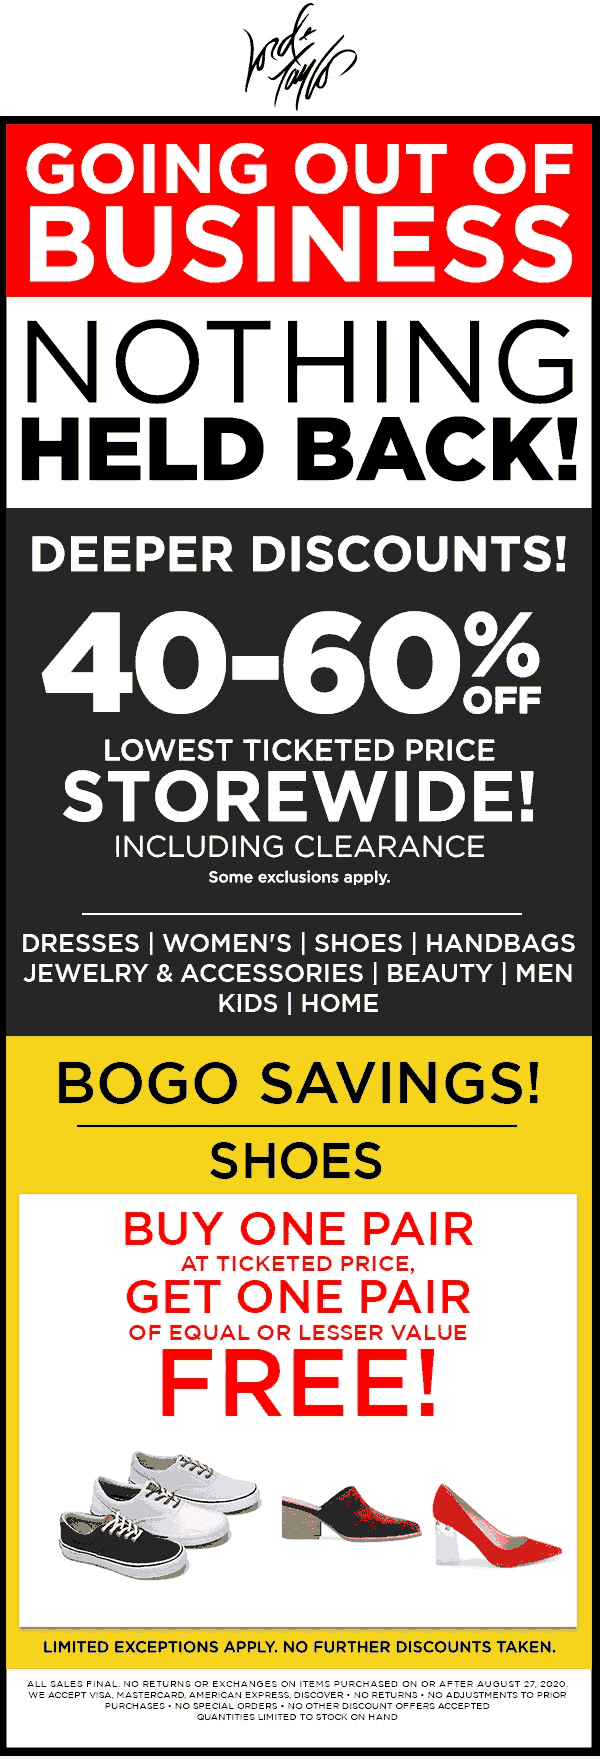 Lord & Taylor stores Coupon  Out-of-business 40-60% off everything + second shoes free at Lord & Taylor, ditto online #lordtaylor 